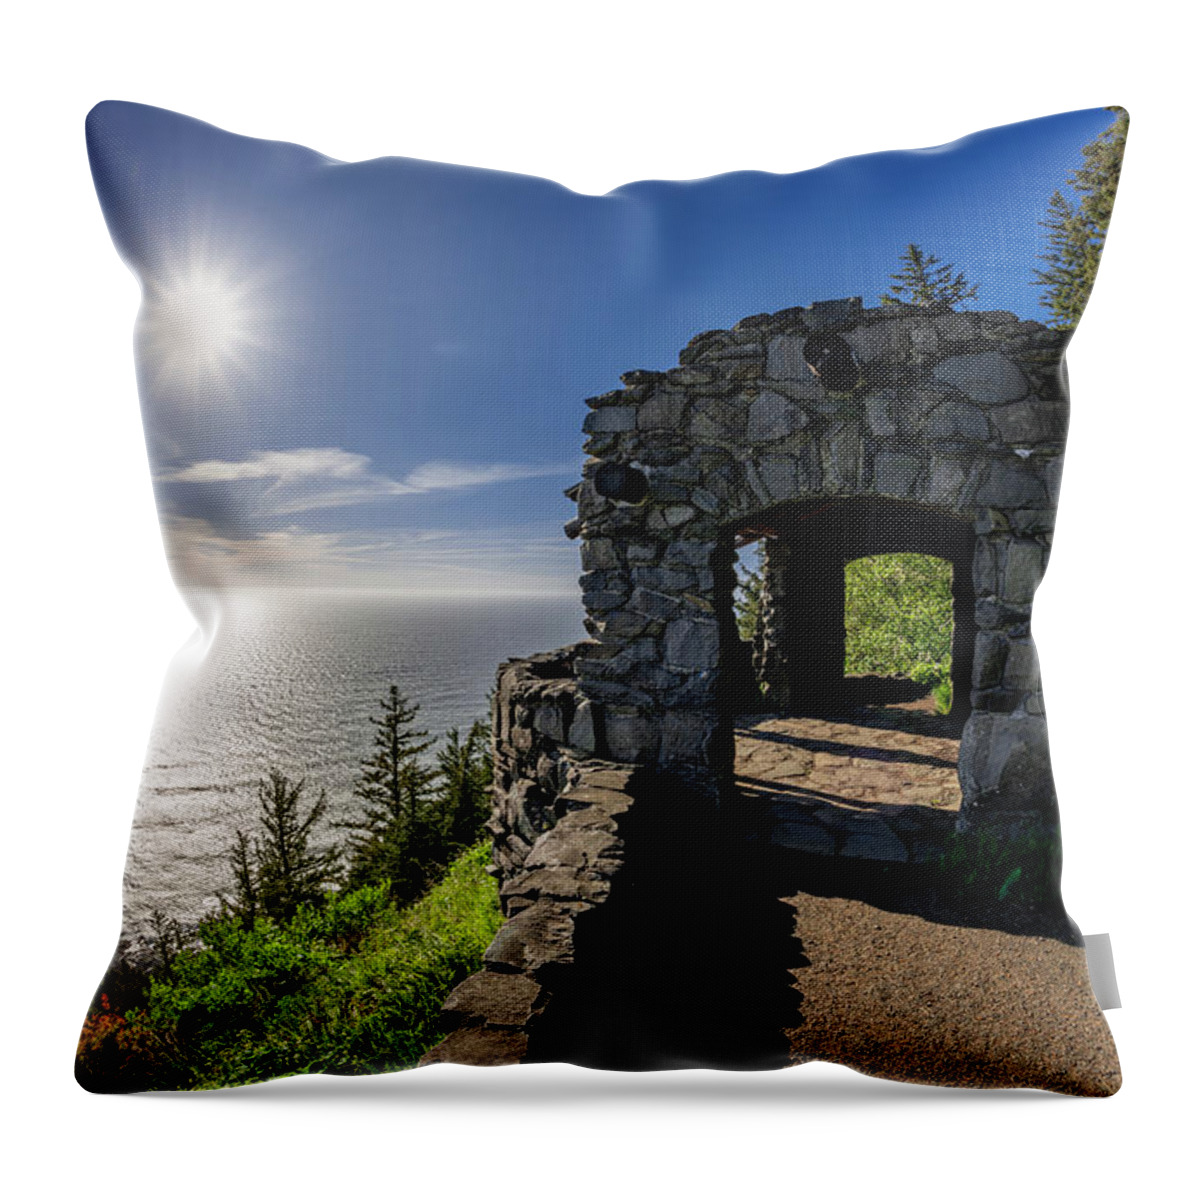 Northwest Throw Pillow featuring the photograph Cape Perpetua Lookout by Pelo Blanco Photo